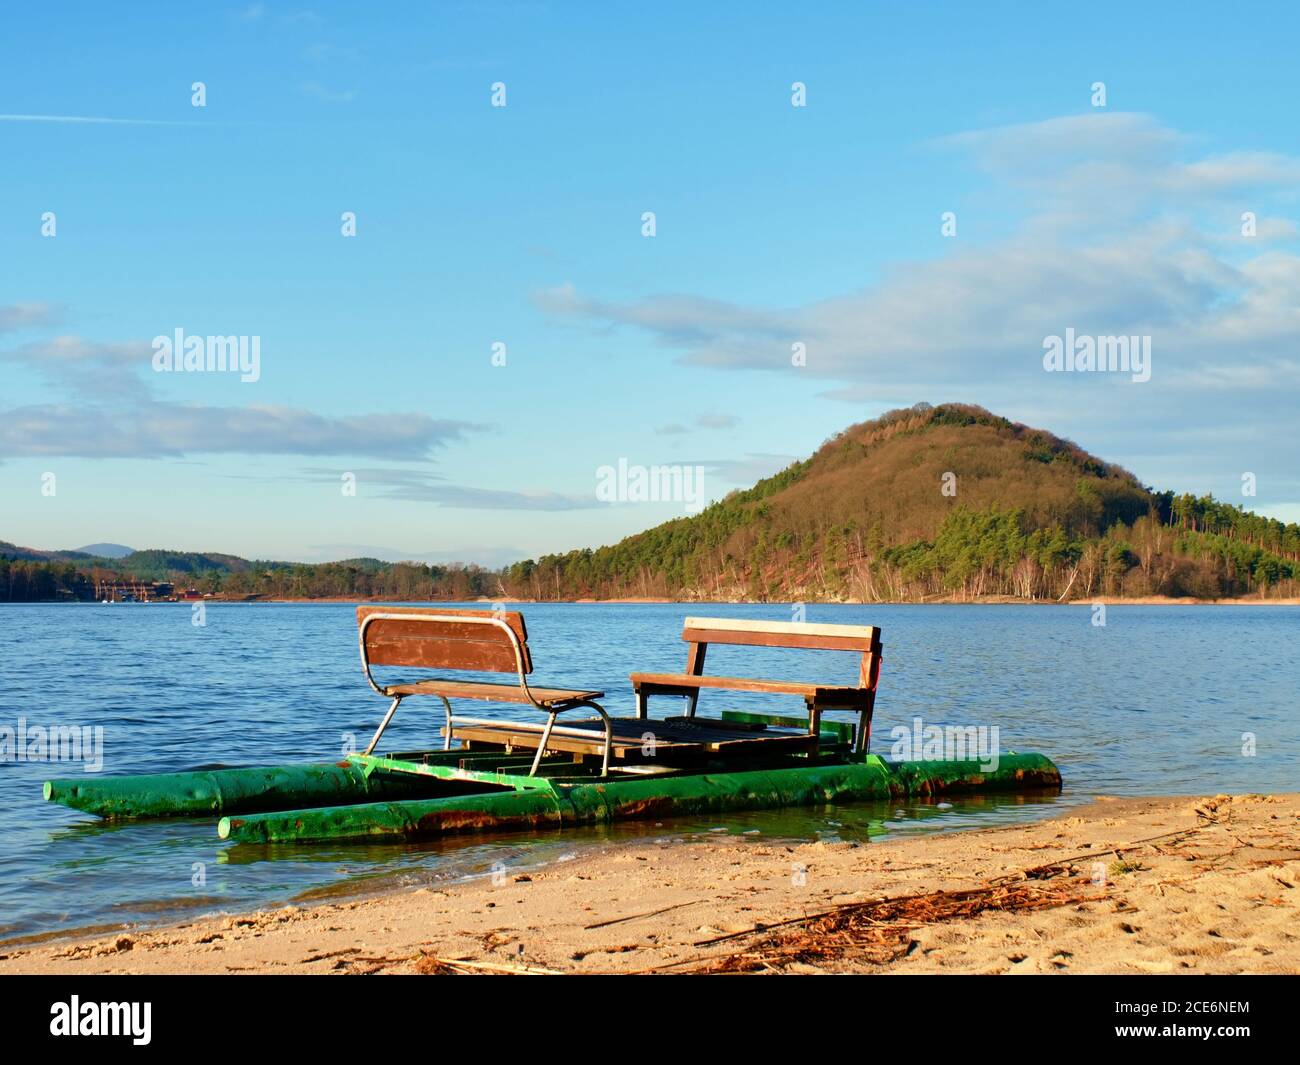 Abandoned old pedal boat caught on sea sandy beach at sunset. Island with forest at horizon. Stock Photo